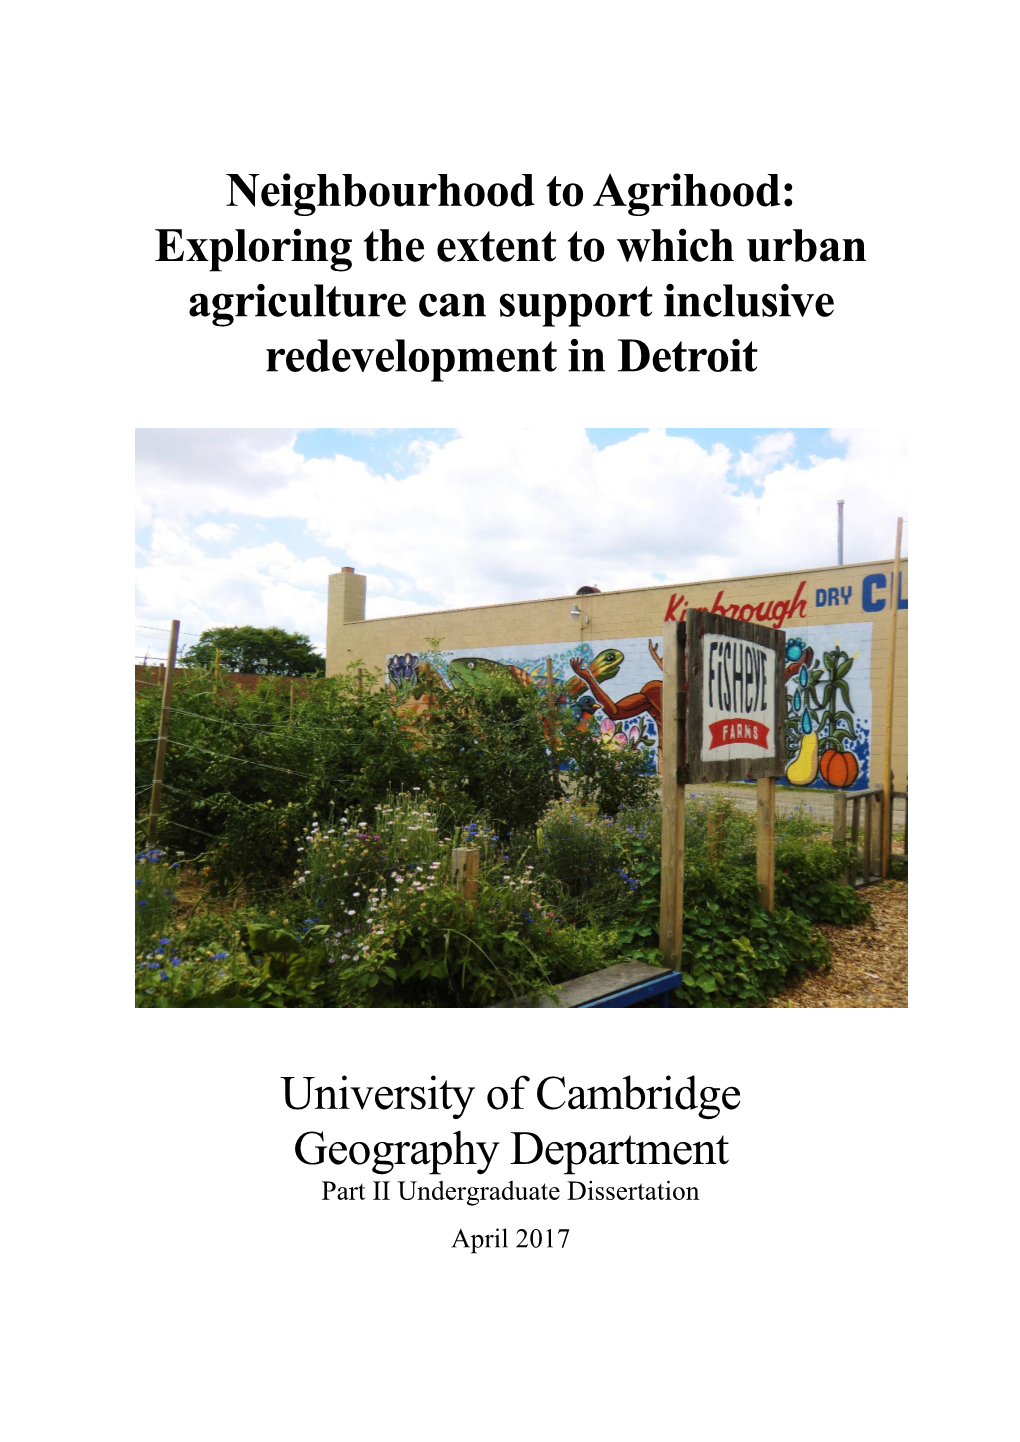 Neighbourhood to Agrihood: Exploring the Extent to Which Urban Agriculture Can Support Inclusive Redevelopment in Detroit